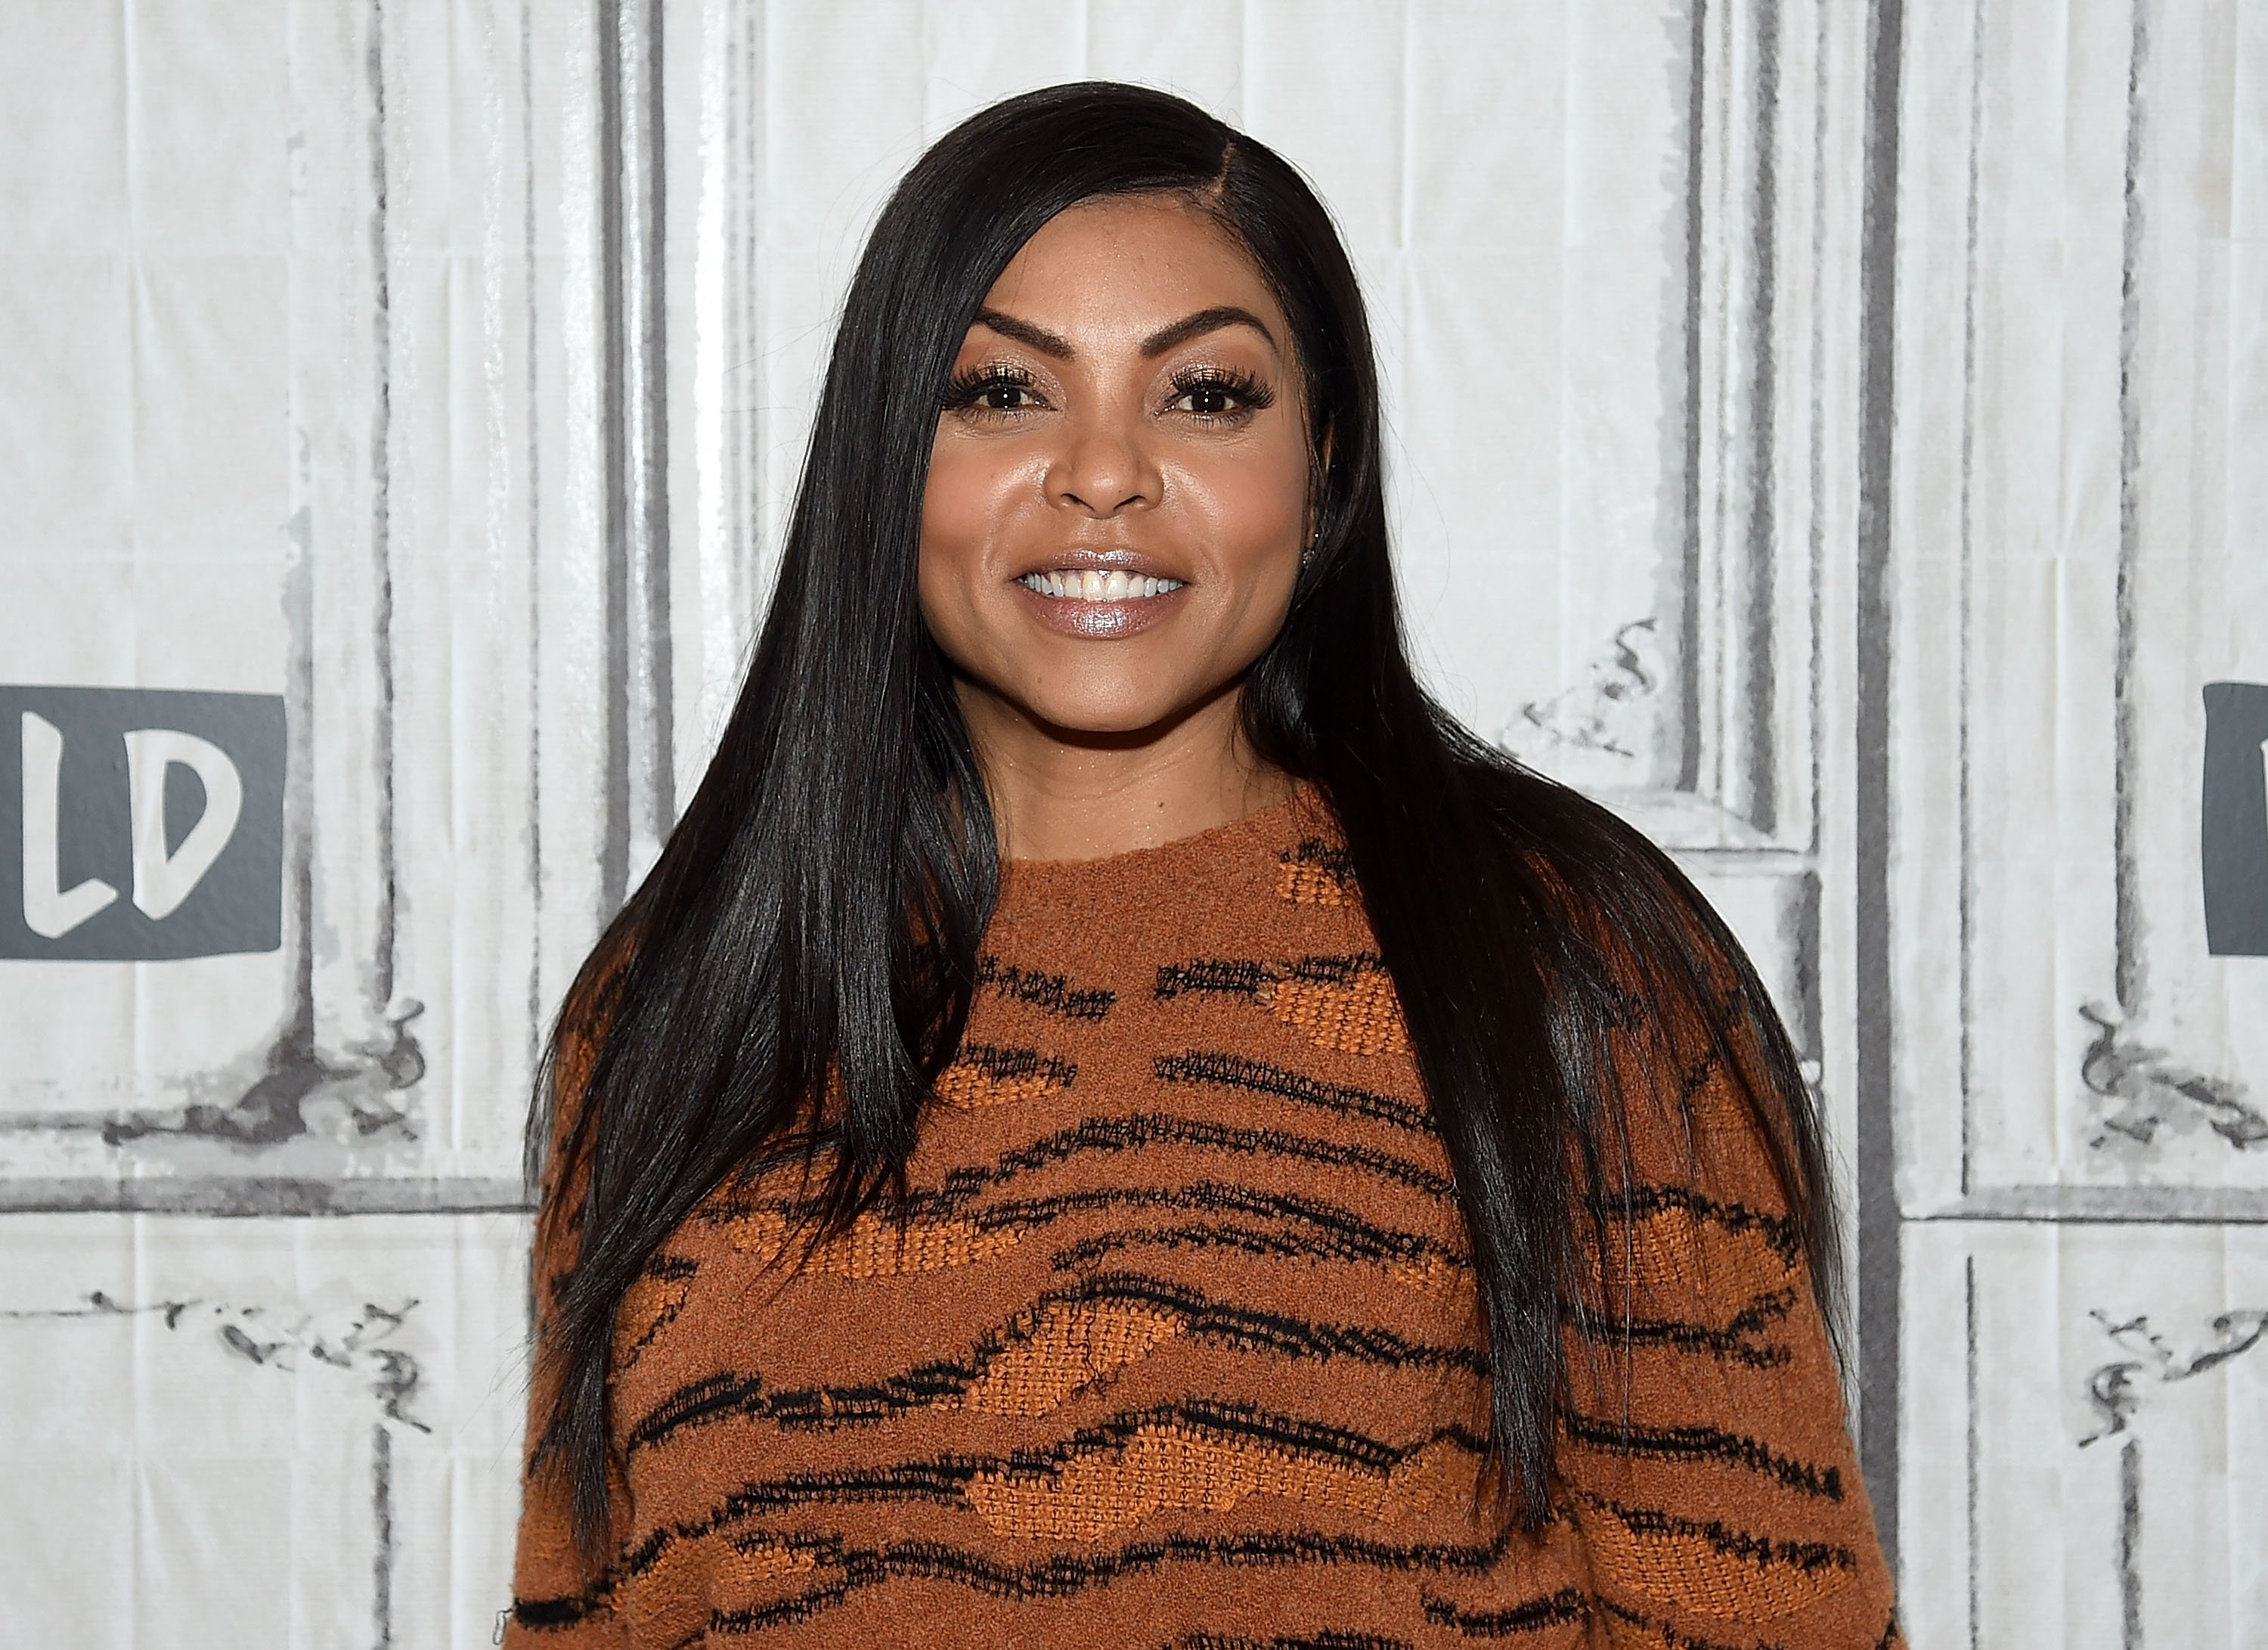  Taraji P. Henson at Build Studio to discuss “Acrimony” during the Build series on March 26, 2018 in New York City.| Source: Getty Images